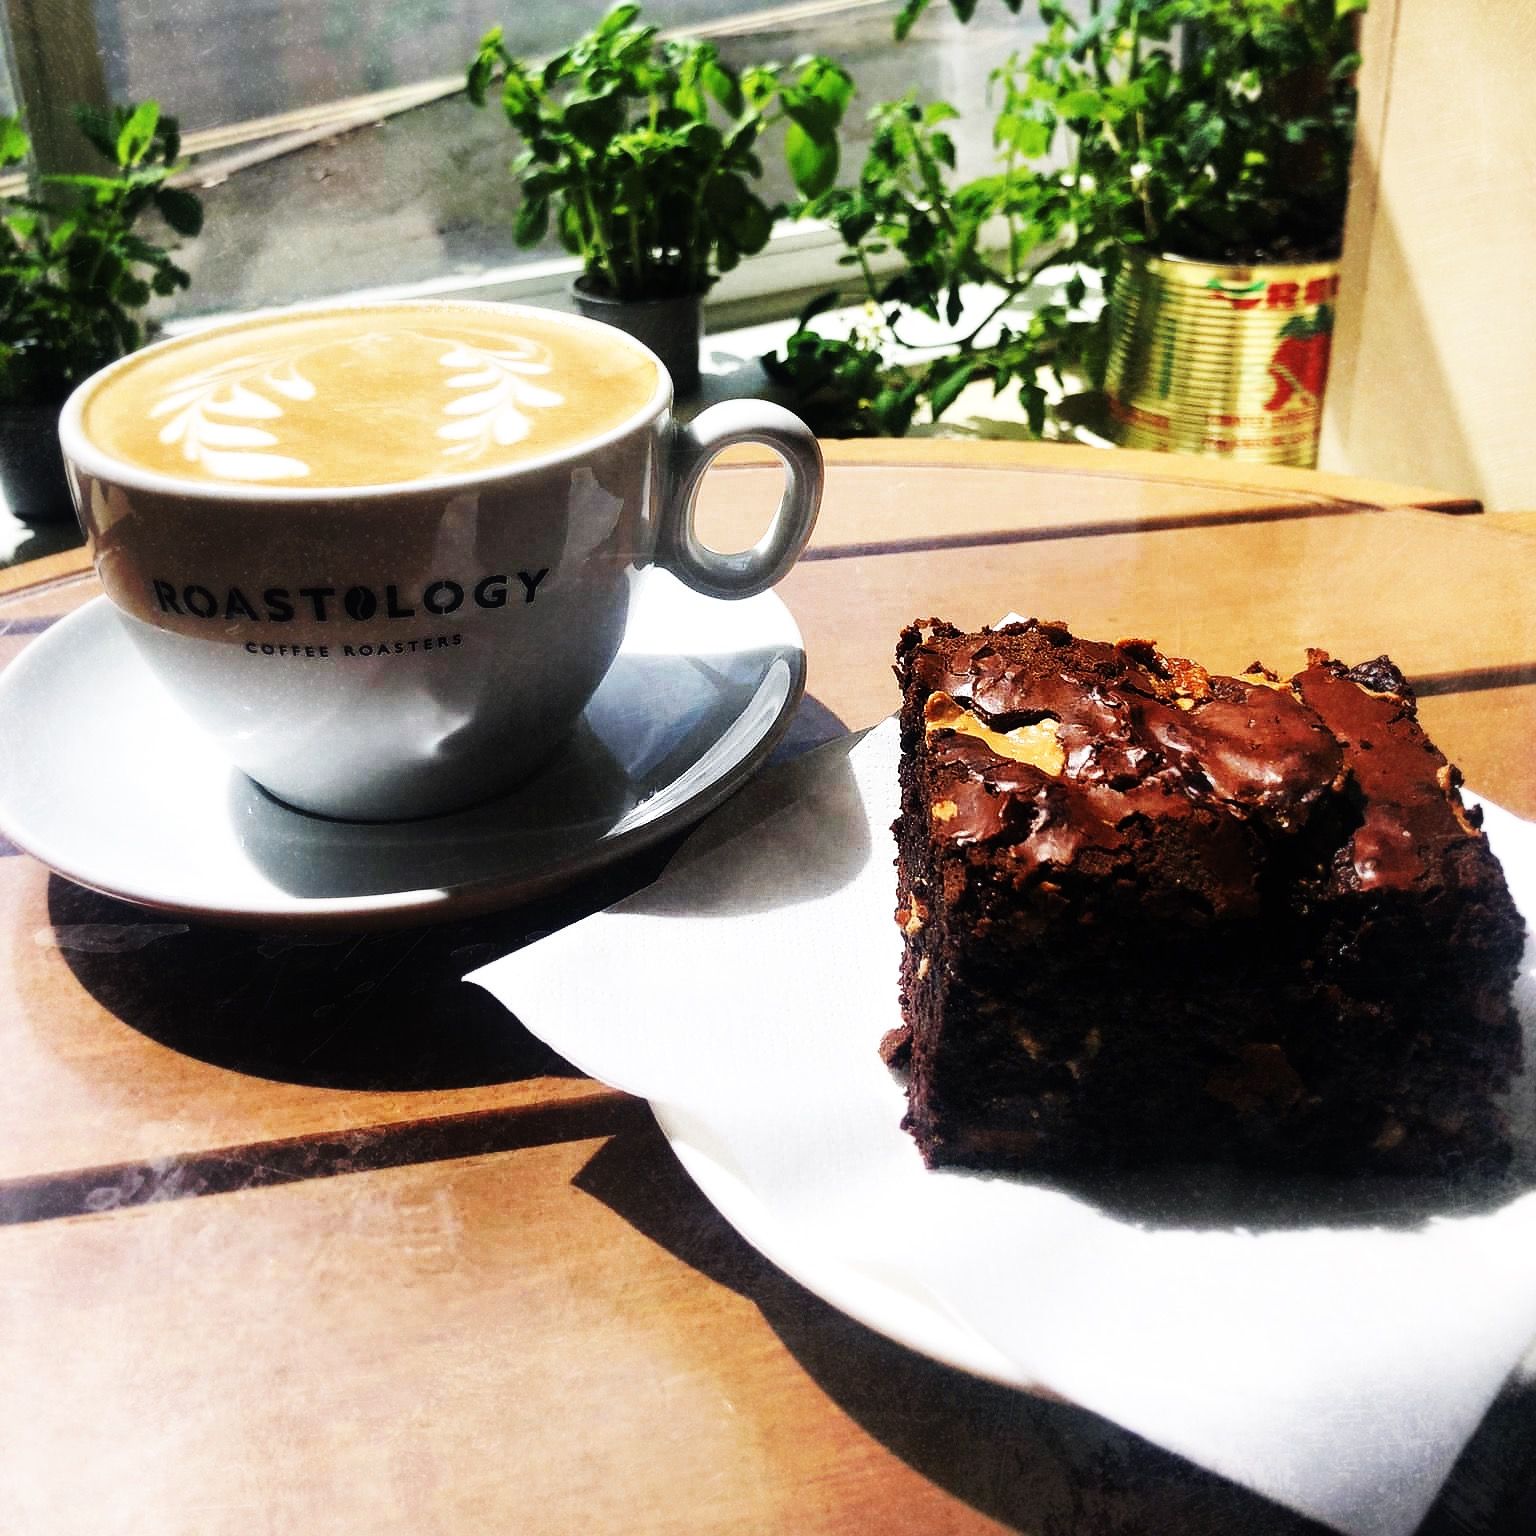 A freshly brewed roastology coffee and a home made chocolate brownie at Kuchene Deli, Dronfield.